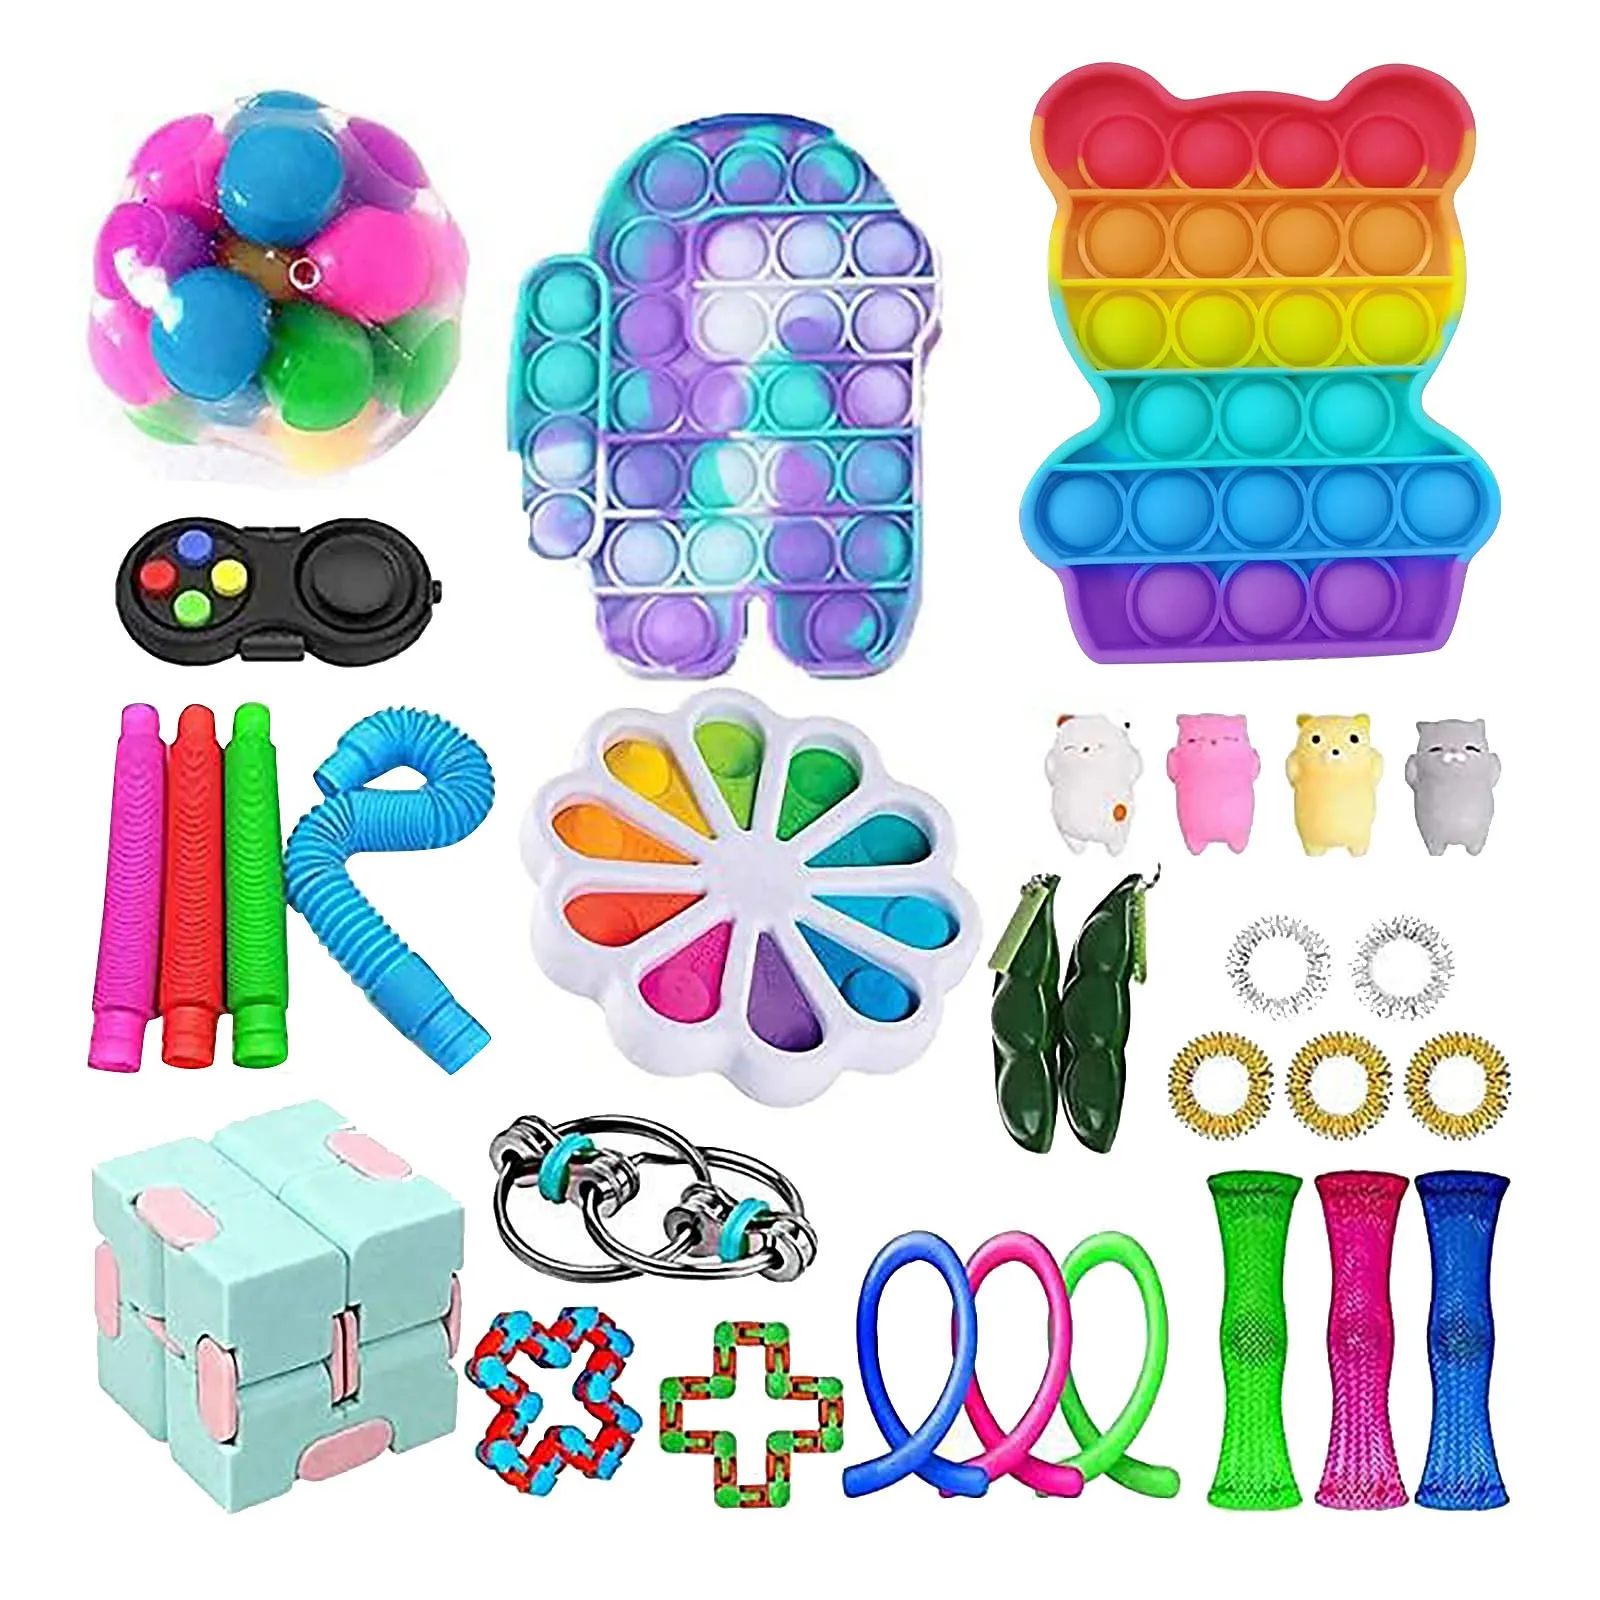 

37PC Cheap Fidget Toys Anti Stress Set Strings Relief Pack Gift for Adults Children Figet Sensory Squishy Relief Antistress